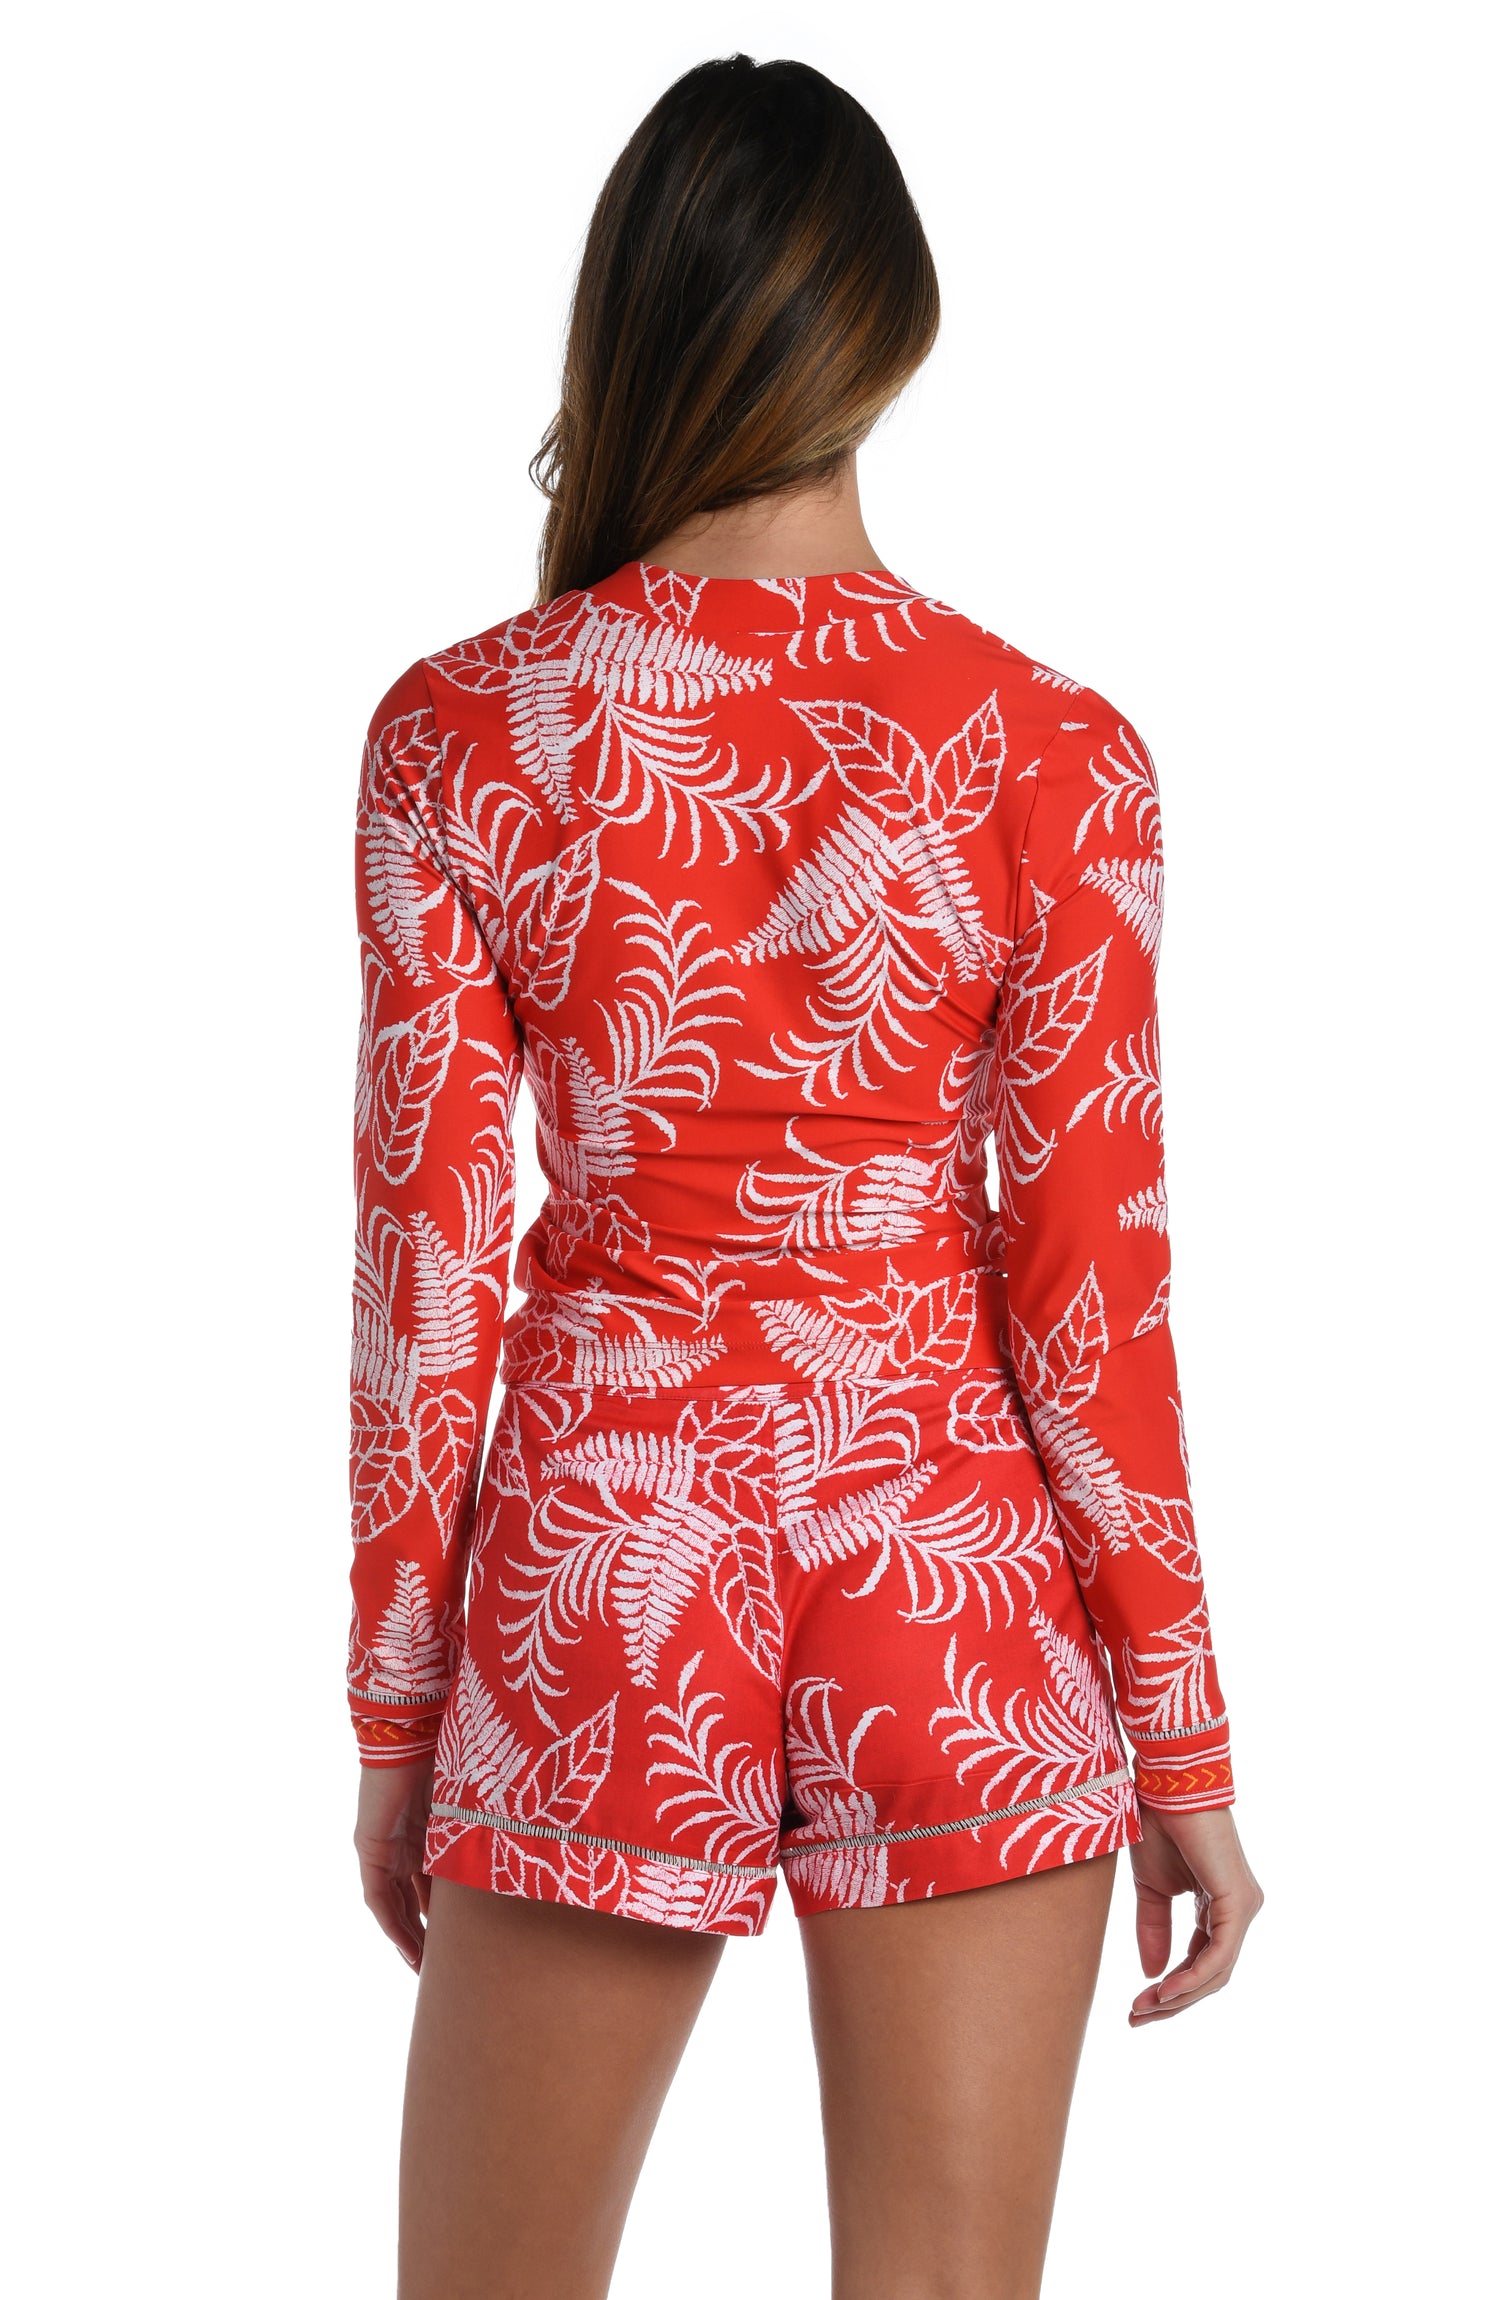 Model is wearing cherry red tropical printed half zip rashguard top up from our Tropical Tapestry collection!